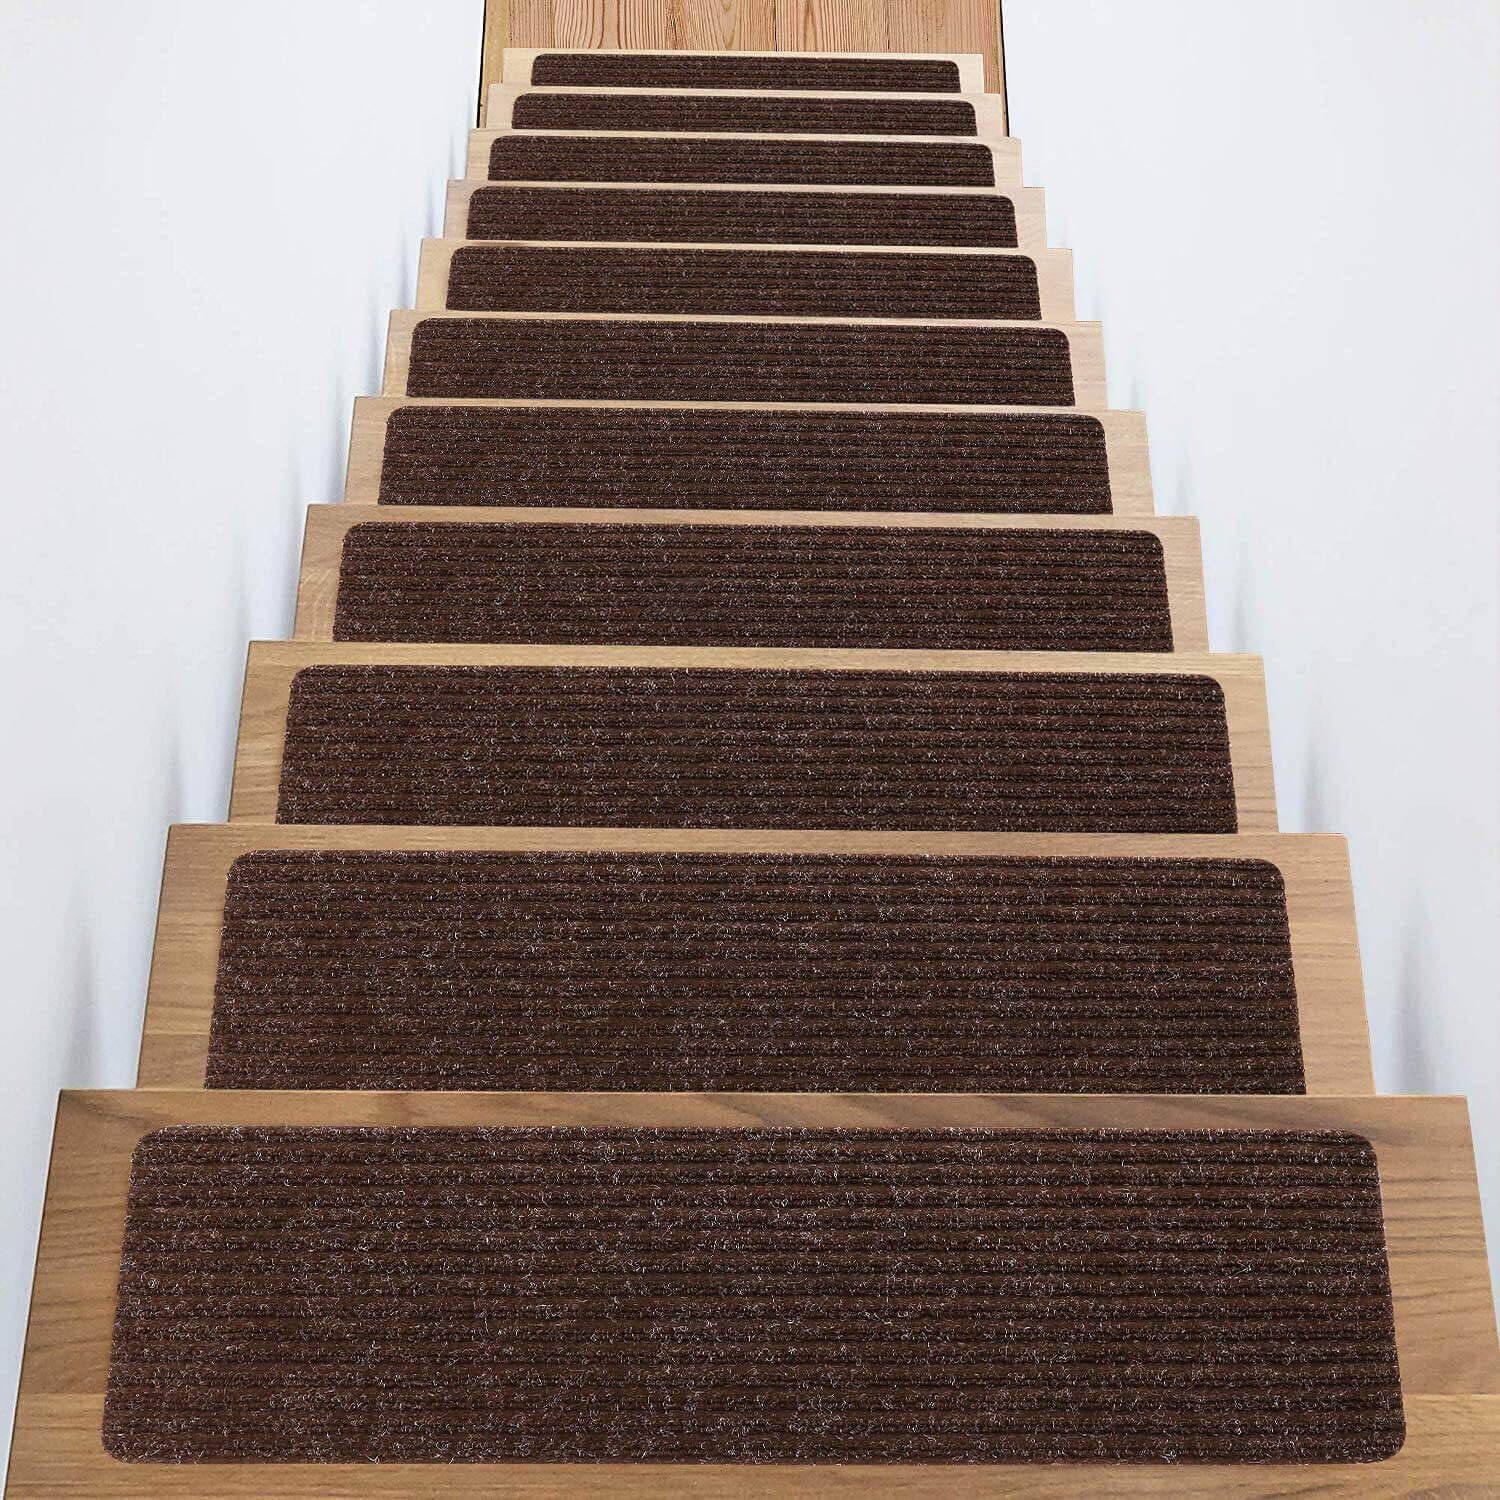 Top 3 Best Carpet Pads For Stairs [Reviewed in 2020]